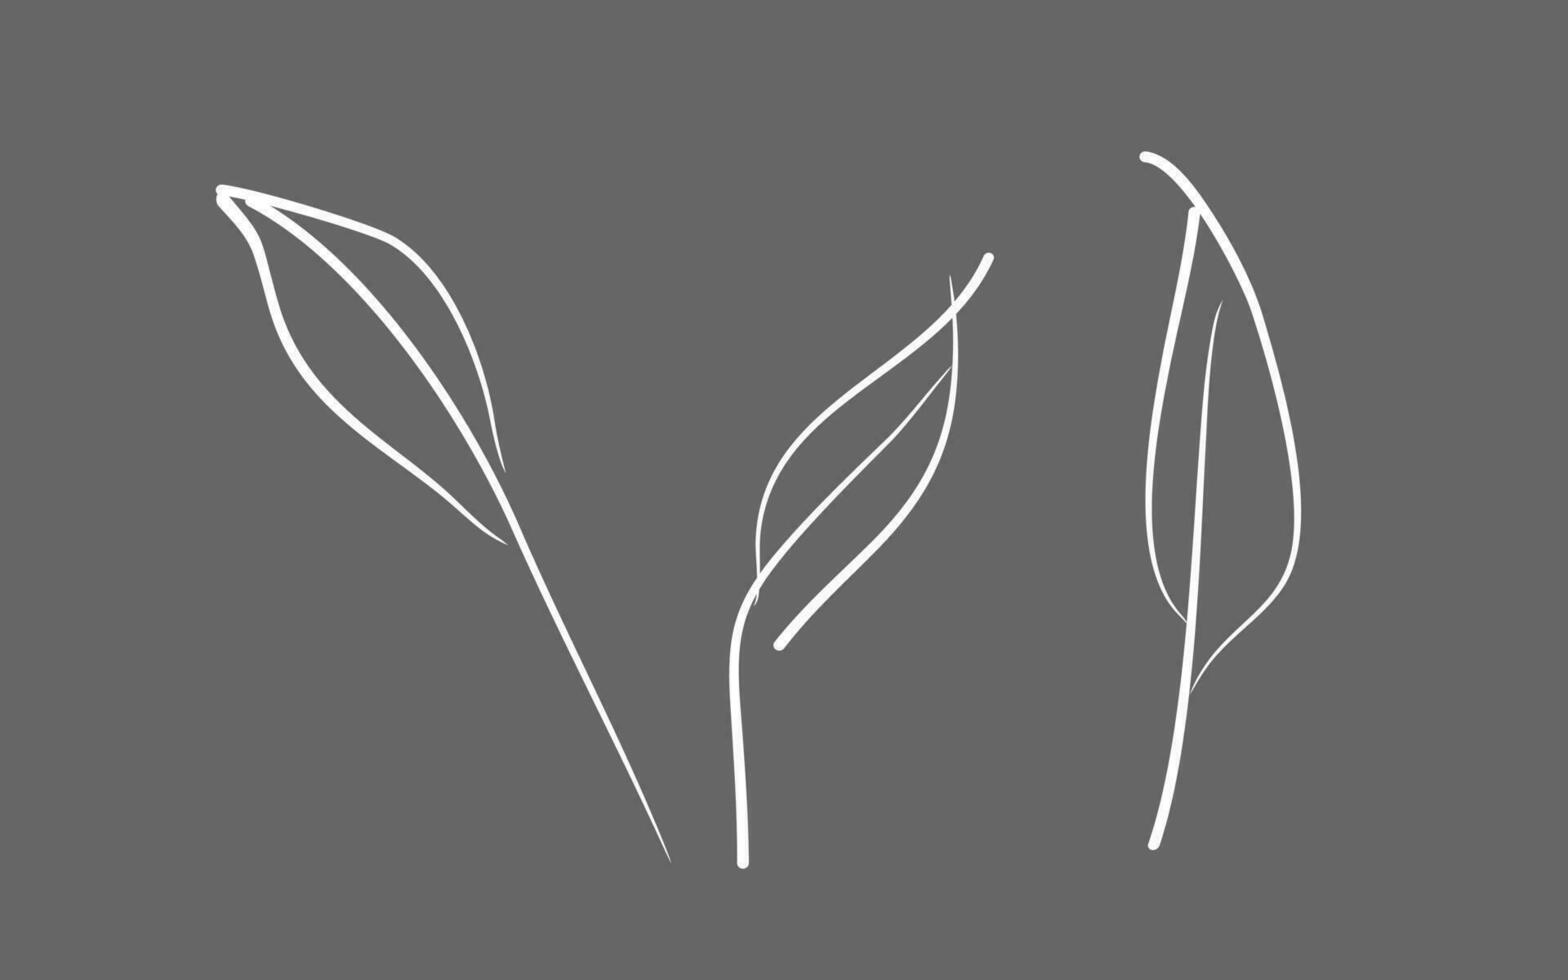 twig leaves set. leaves drawing thin line isolate. floral decor, eco design elements vector